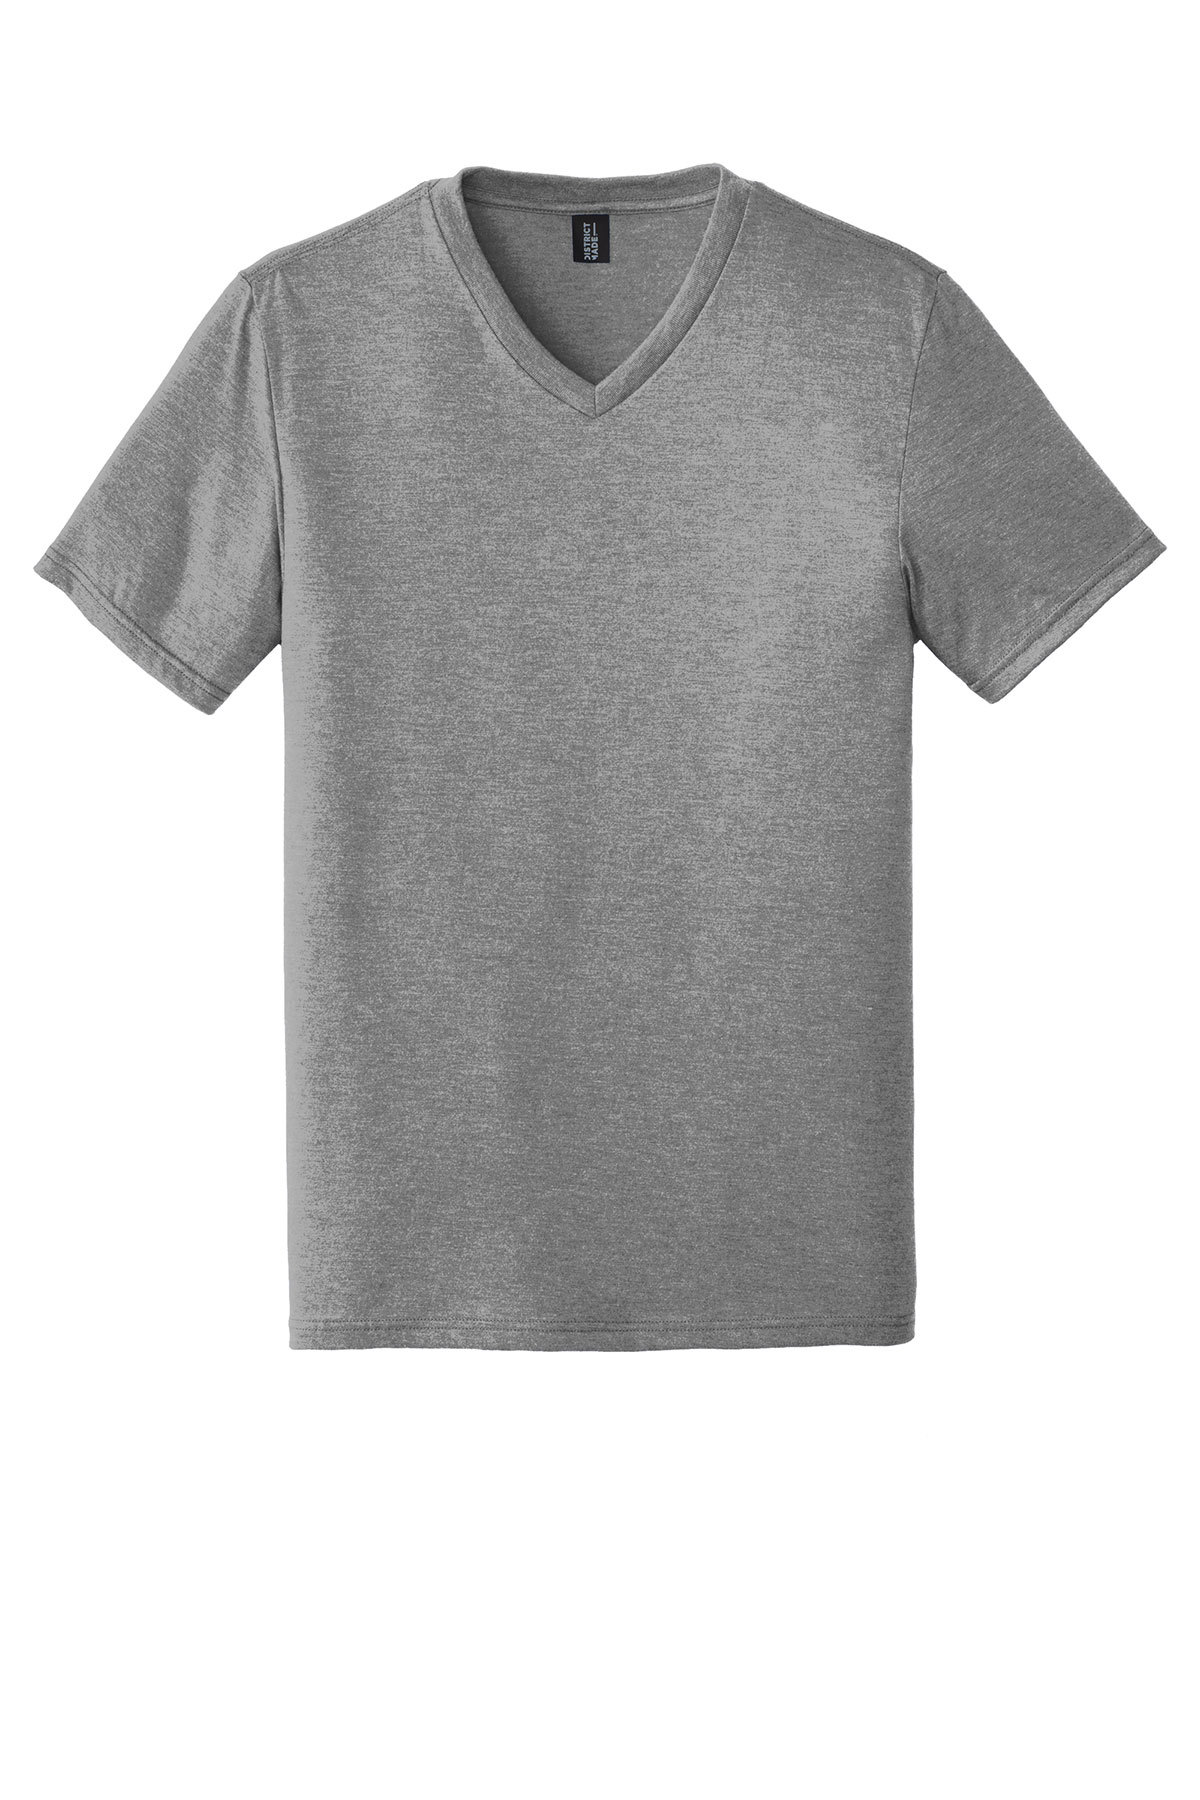 District Perfect Tri V-Neck Tee | Product | District